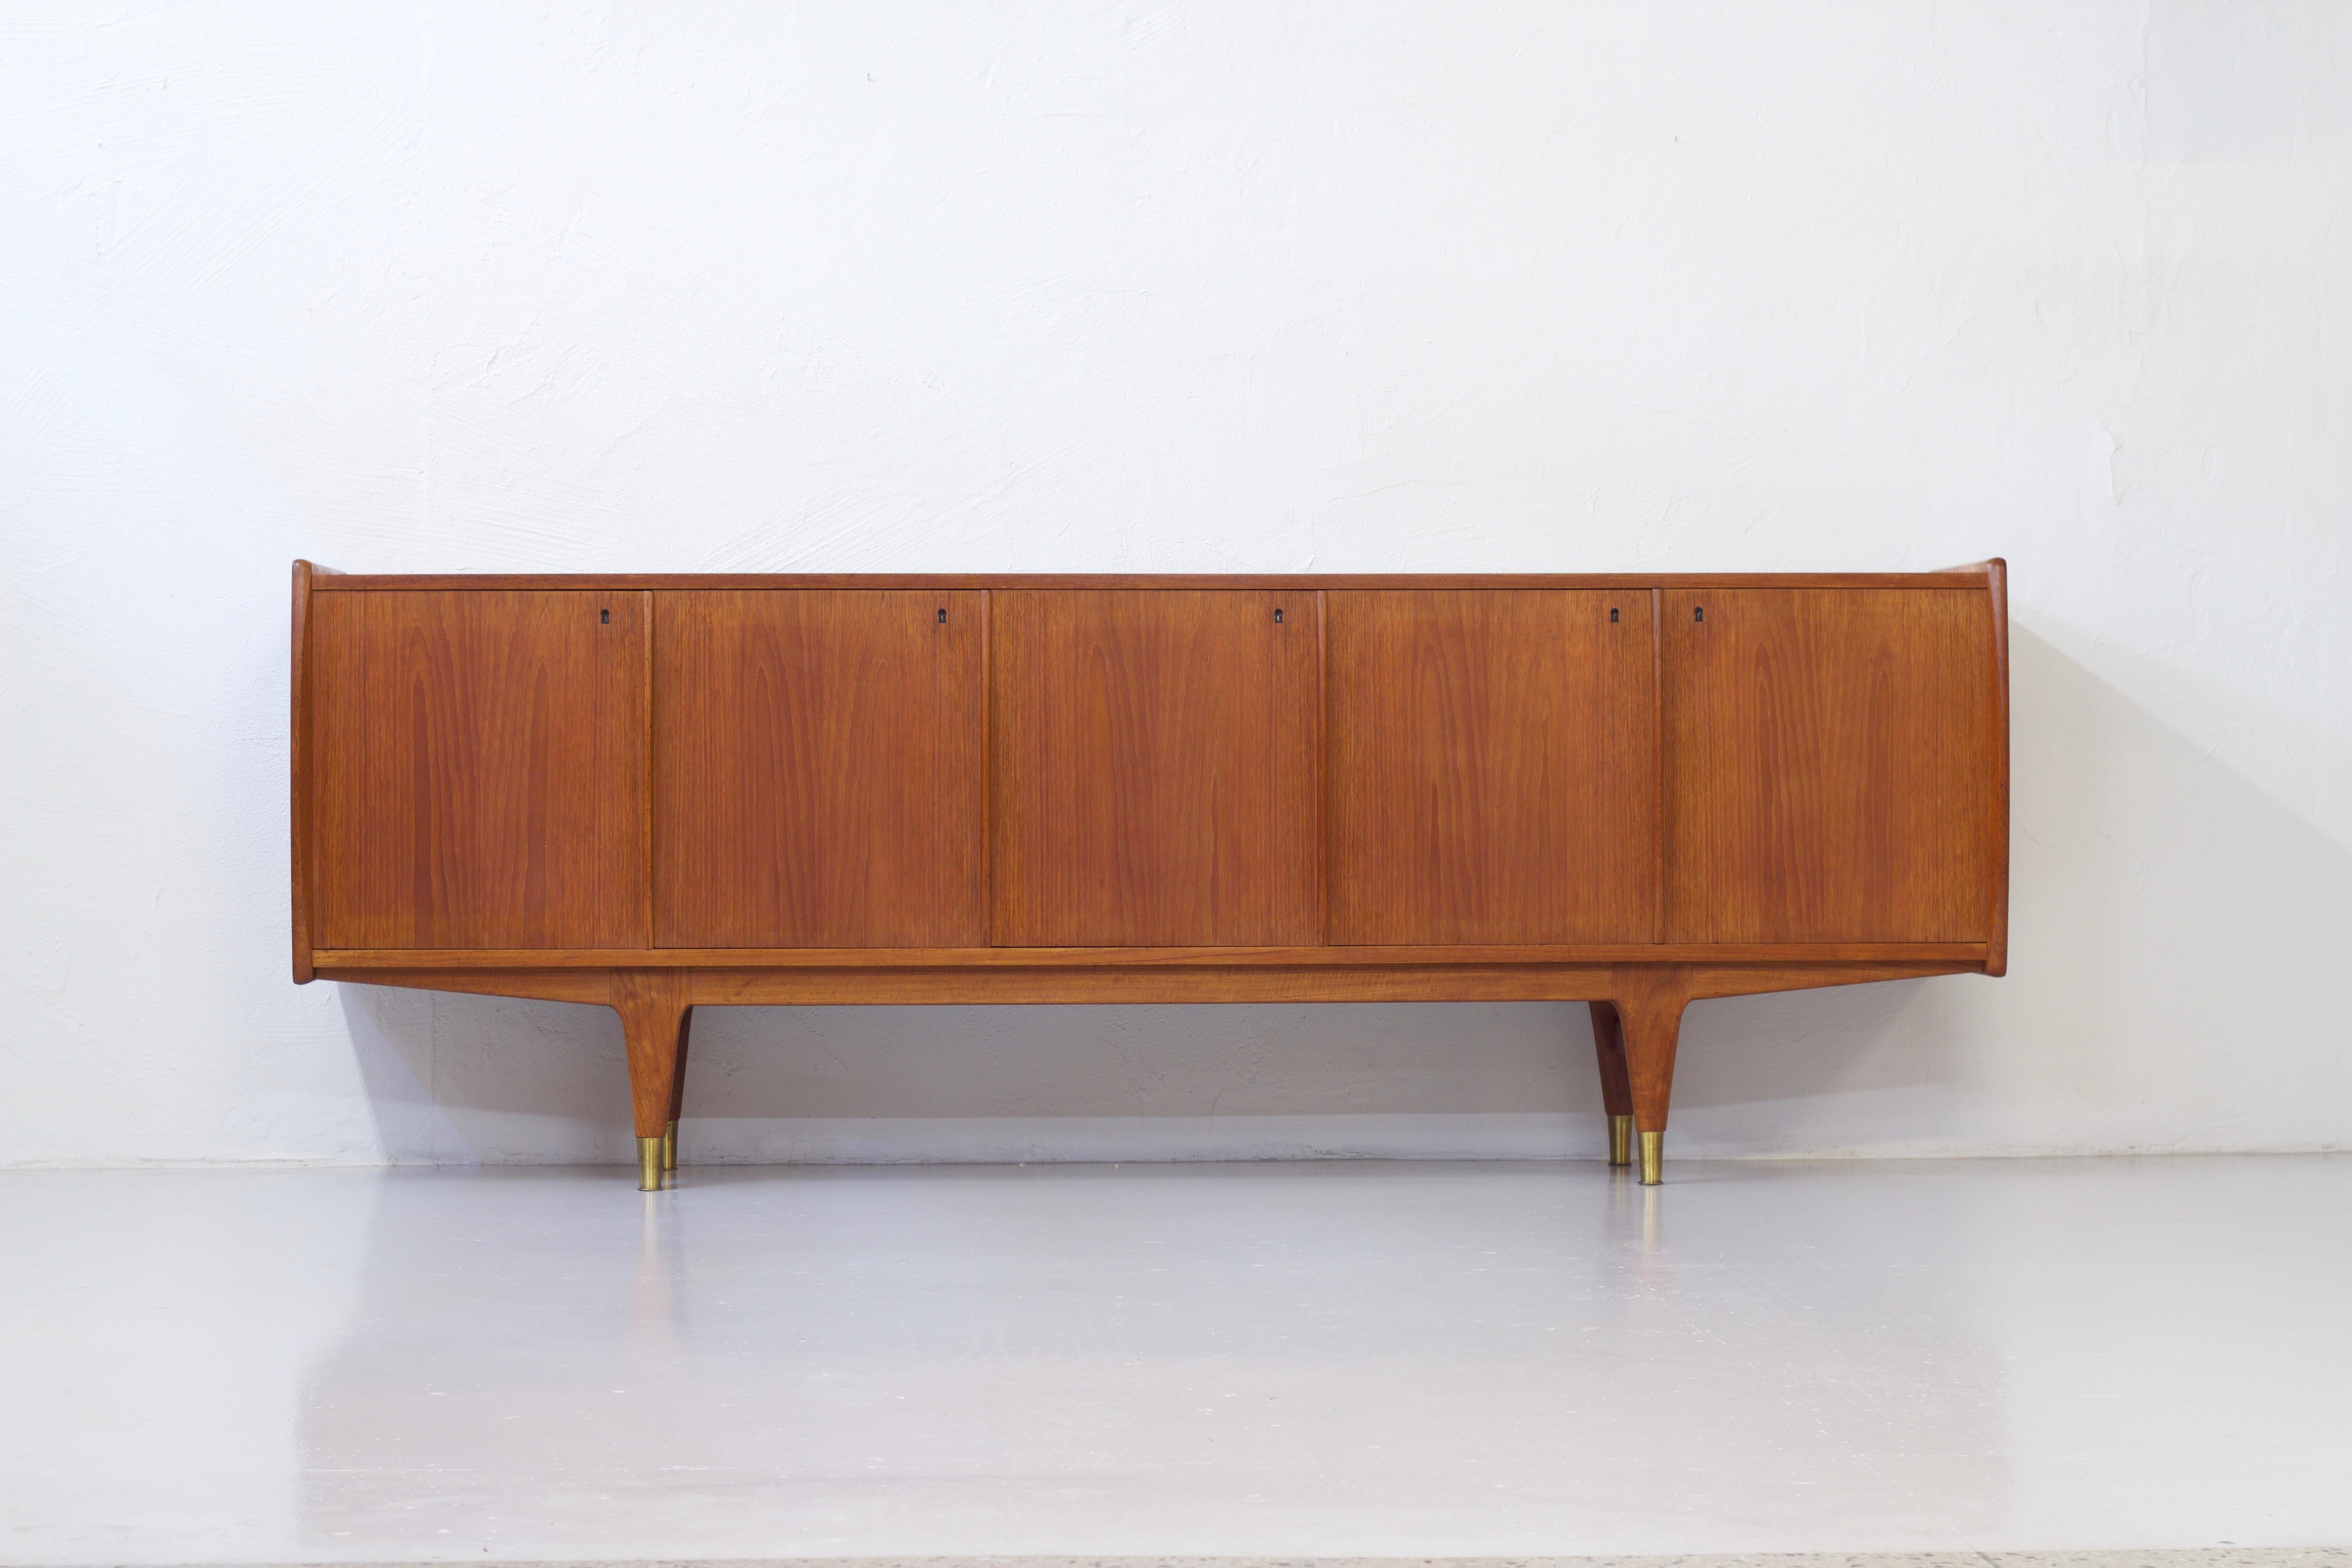 The Falk sideboard was designed by the dynamic Norwegian duo Rolf Rastas & Adolf Relling in the early 1960s. It’s made from teak and has a very nice detail in the brass feet. Front consists of five doors with shelving behind. Very good vintage